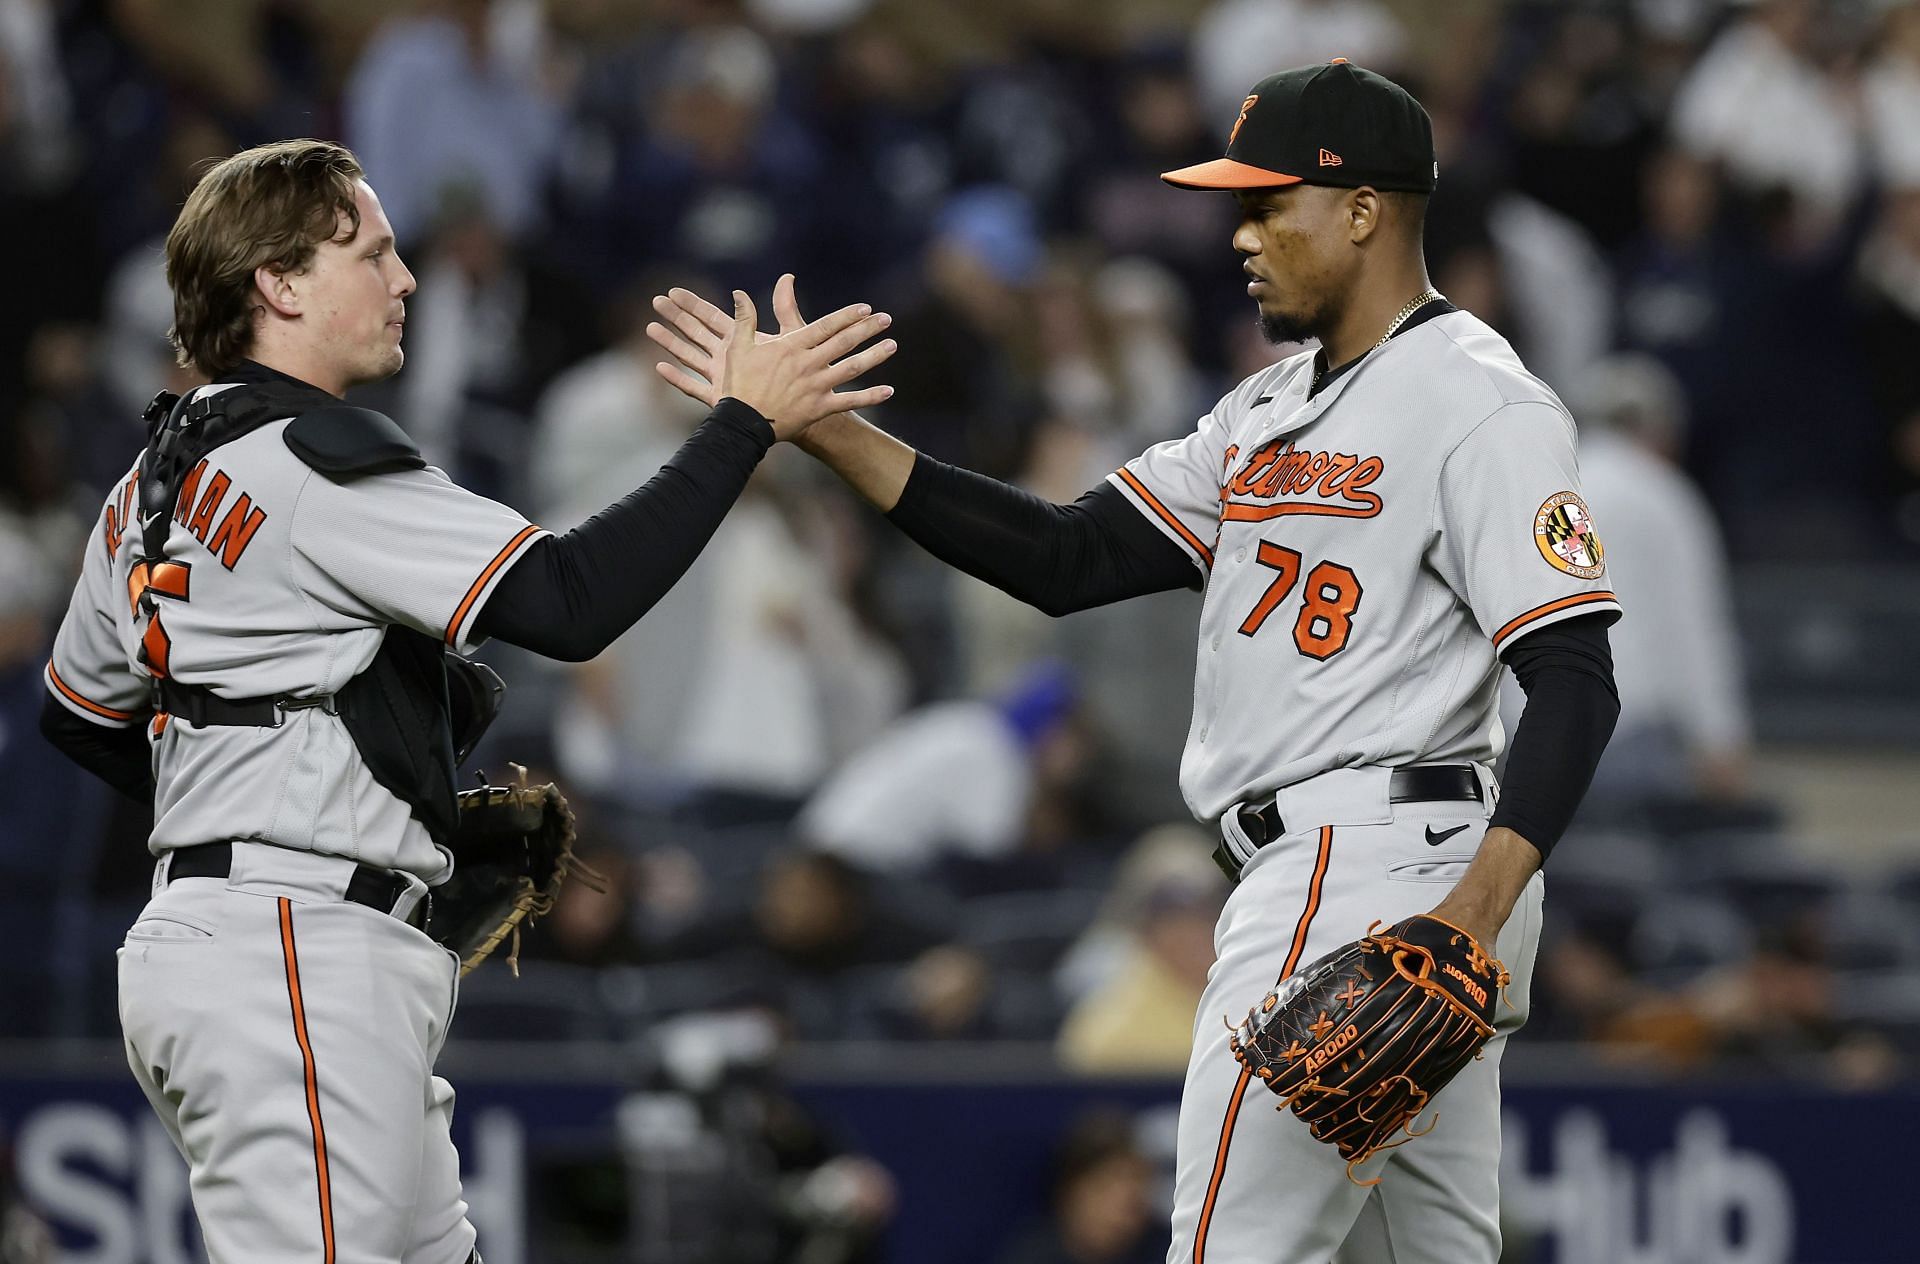 Adley Rutschman, left, and Yennier Cano of the Baltimore Orioles celebrate after defeating the New York Yankees at Yankee Stadium.